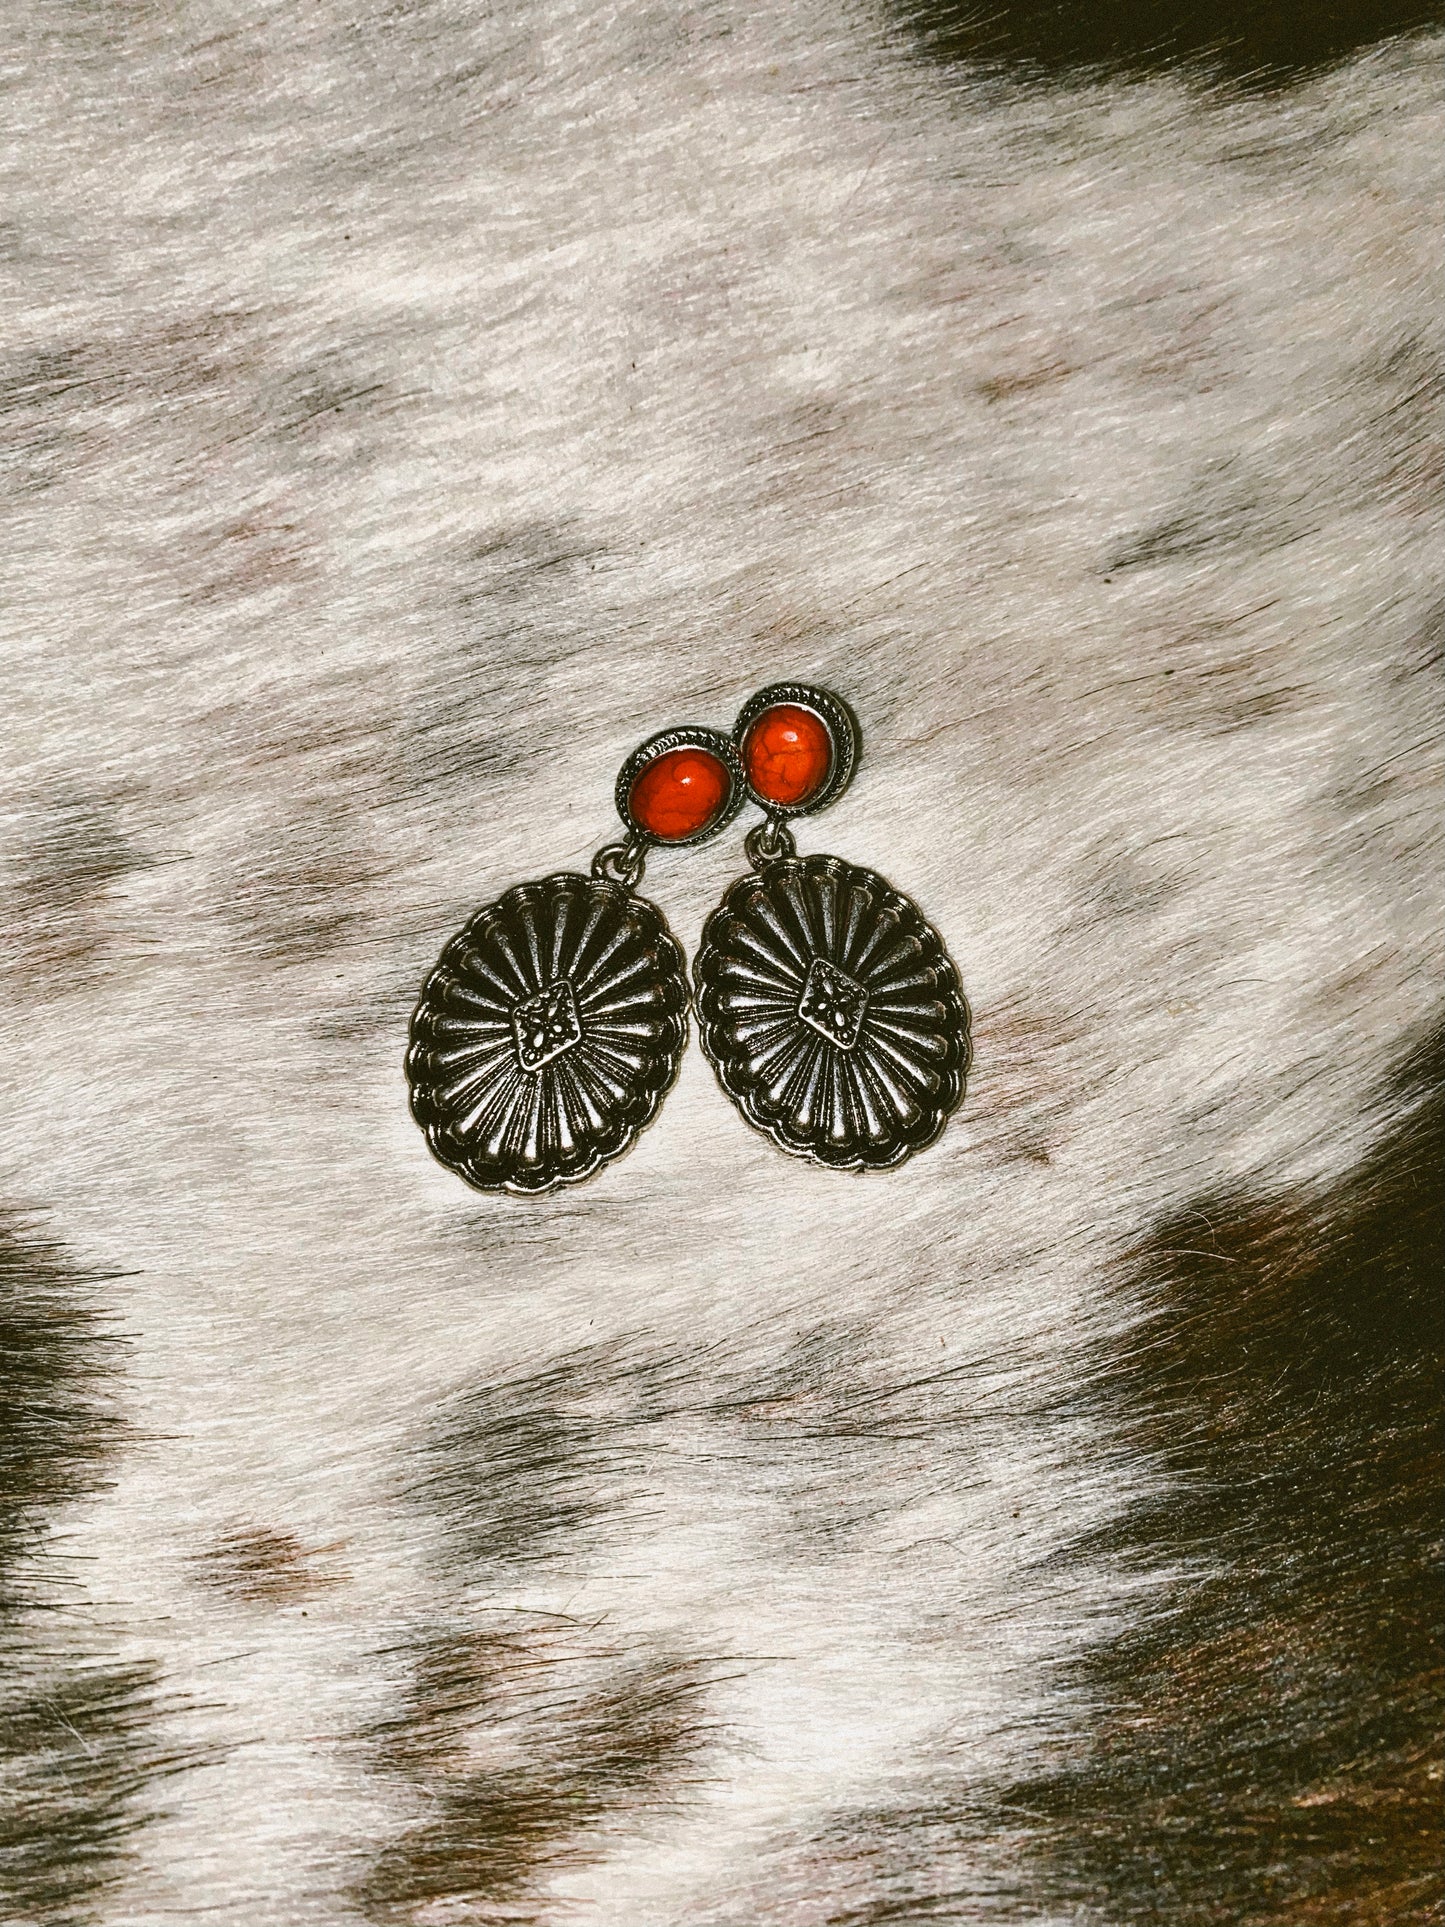 Red and Silvertone Canyon Creek Concho Earrings